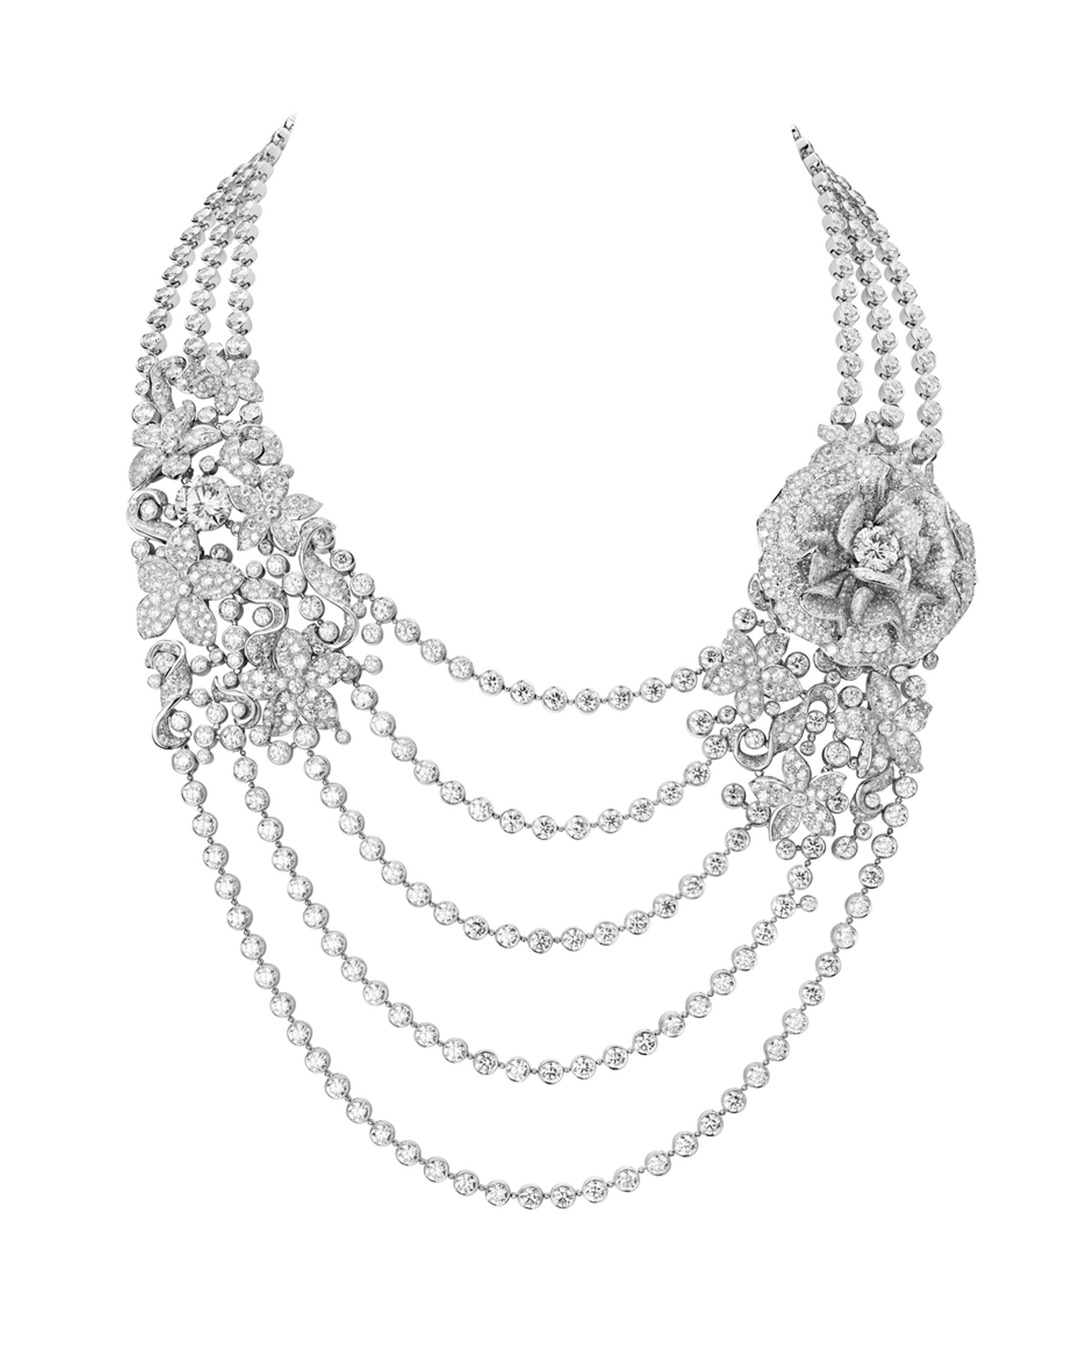 Paris Couture Week 2022 diamond jewelry chanel necklace